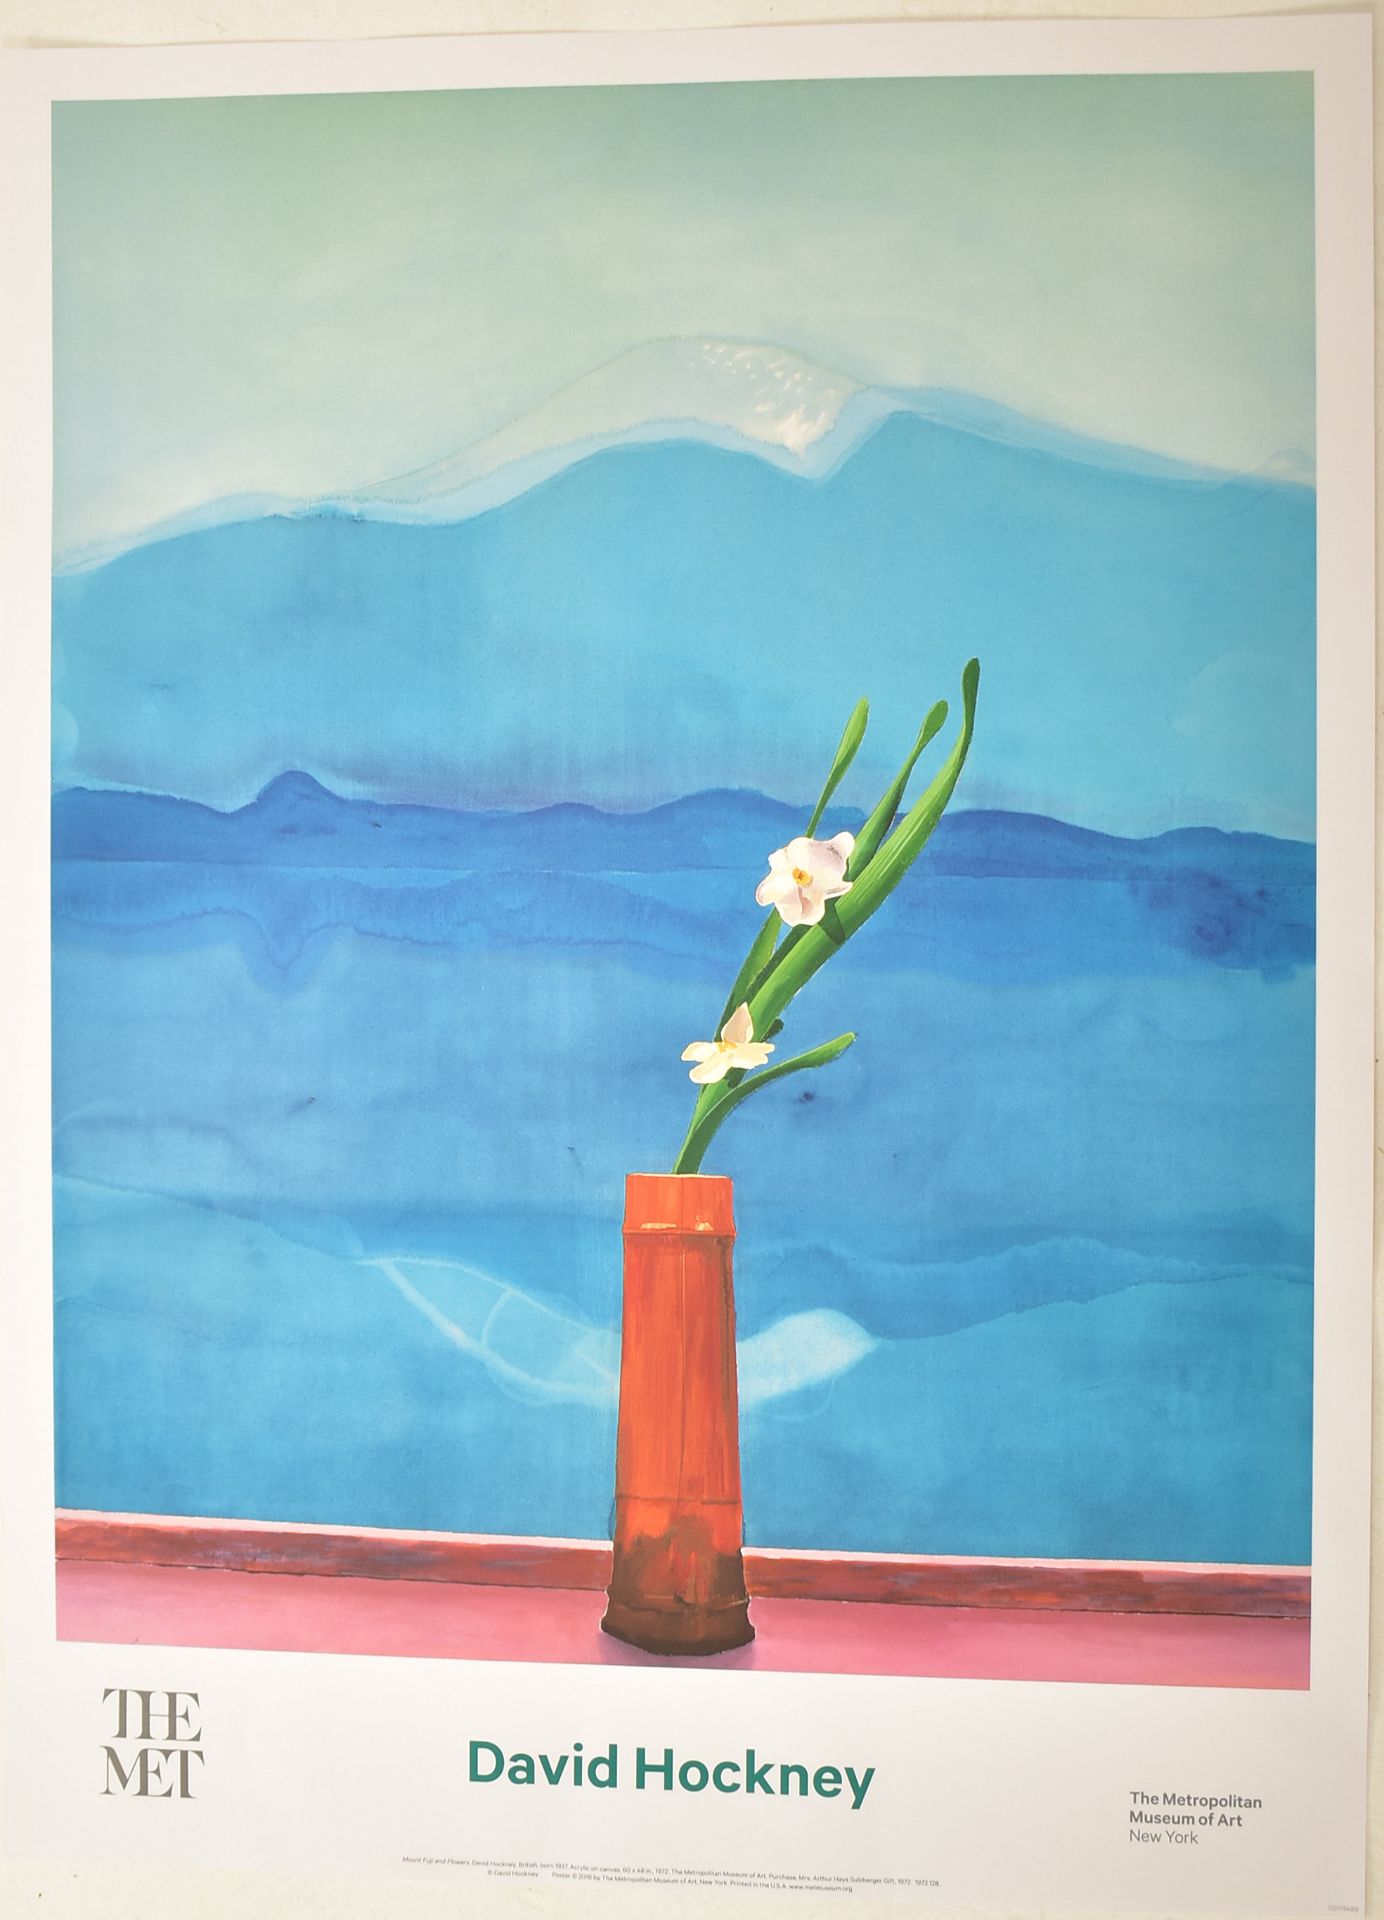 DAVID HOCKNEY (B. 1937) - OFFSET LITHOGRAPH 'THE MET ' POSTER